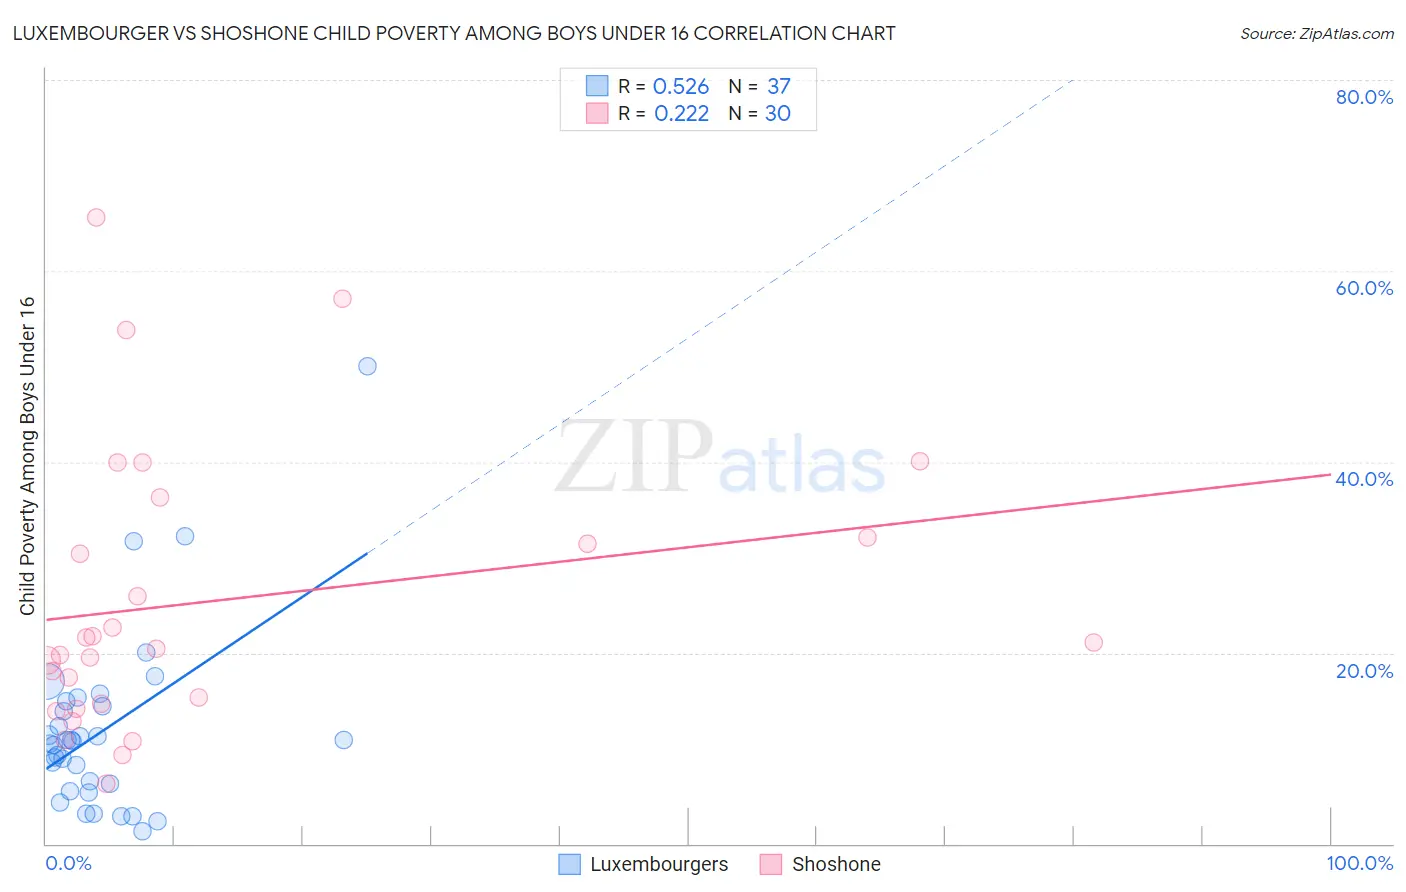 Luxembourger vs Shoshone Child Poverty Among Boys Under 16